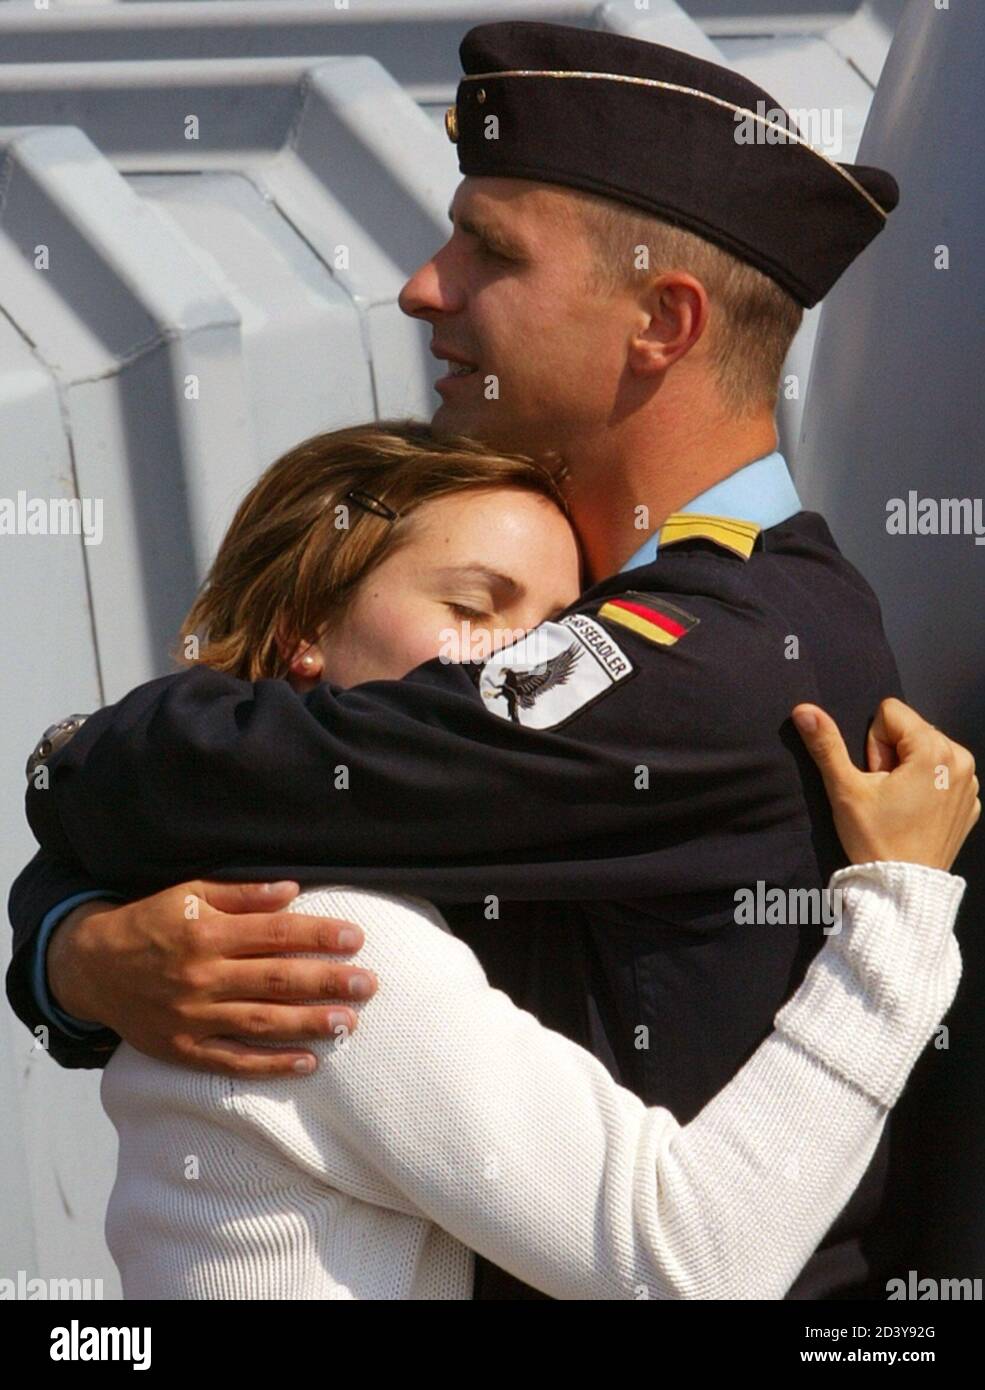 GERMAN NAVY CAPTAIN-LIEUTENANT HEINICKE EMBRACES HIS GIRLFRIEND KUHRT AFTER GERMAN NAVY BOATS ARRIVED AT THE NAVAL PORT OF WARNEMUENDE.  German Navy captain-lieutenant Oliver Heinicke embraces his girlfriend Kristina Kuhrt after a German Navy boats arrived at the Baltic sea naval port of Warnemuende near Rostock April 30, 2004. German fast patrol boats Seeadler and Dachs and tender Elbe returned from a 3-month employment to carry out anti-terrorism surveillance operations in the Strait of Gibraltar. The patrols are part of NATO's 'Active Endeavour' operation to monitor activities in the Medite Stock Photo